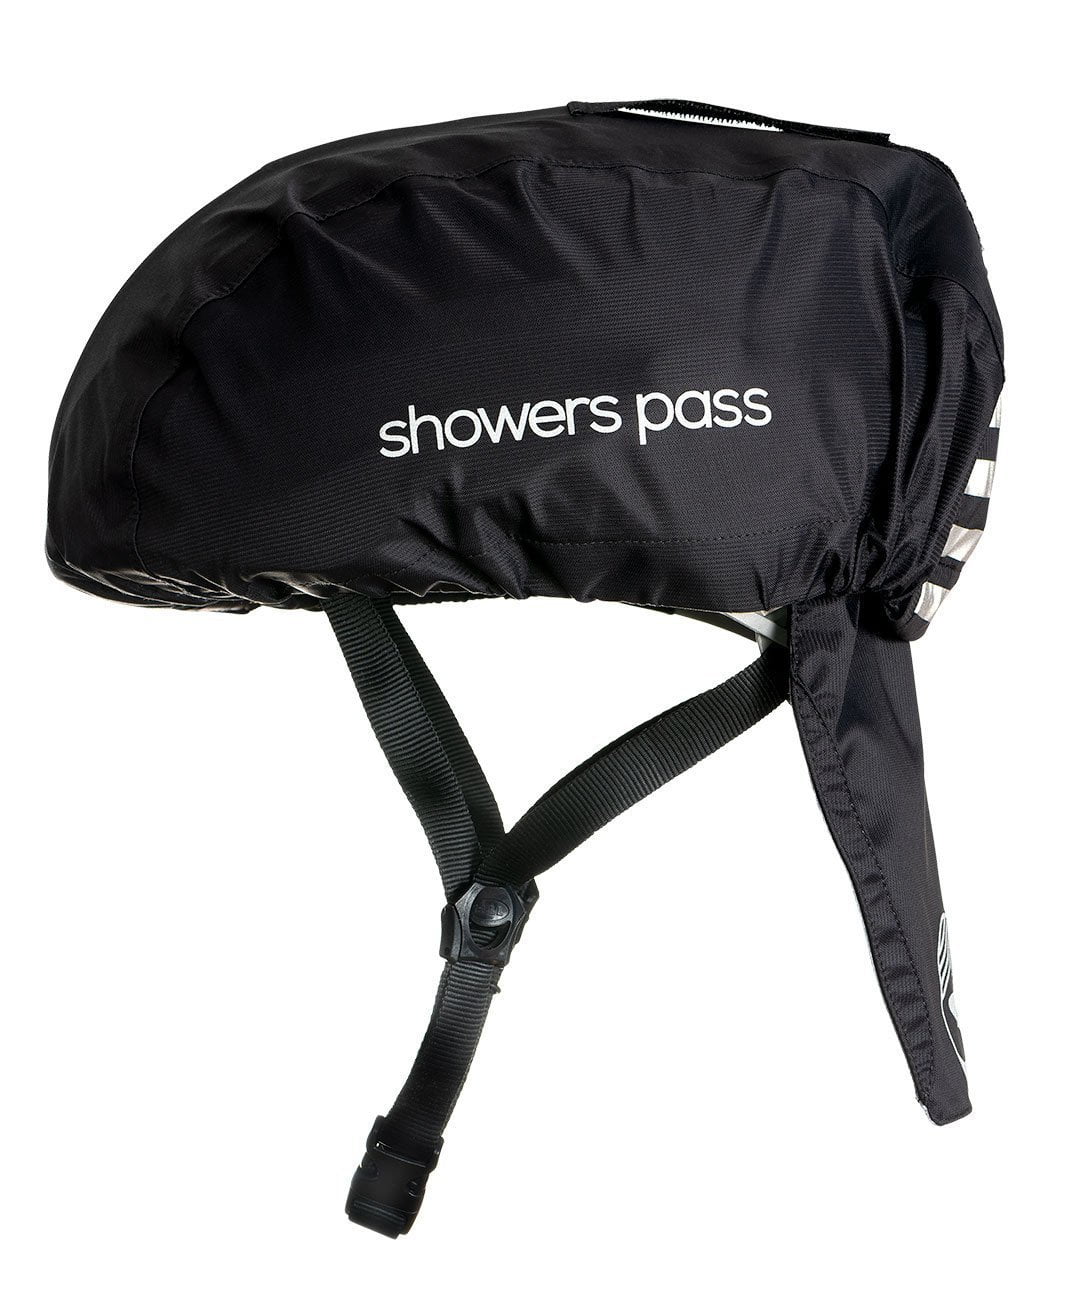 showers pass shoe covers